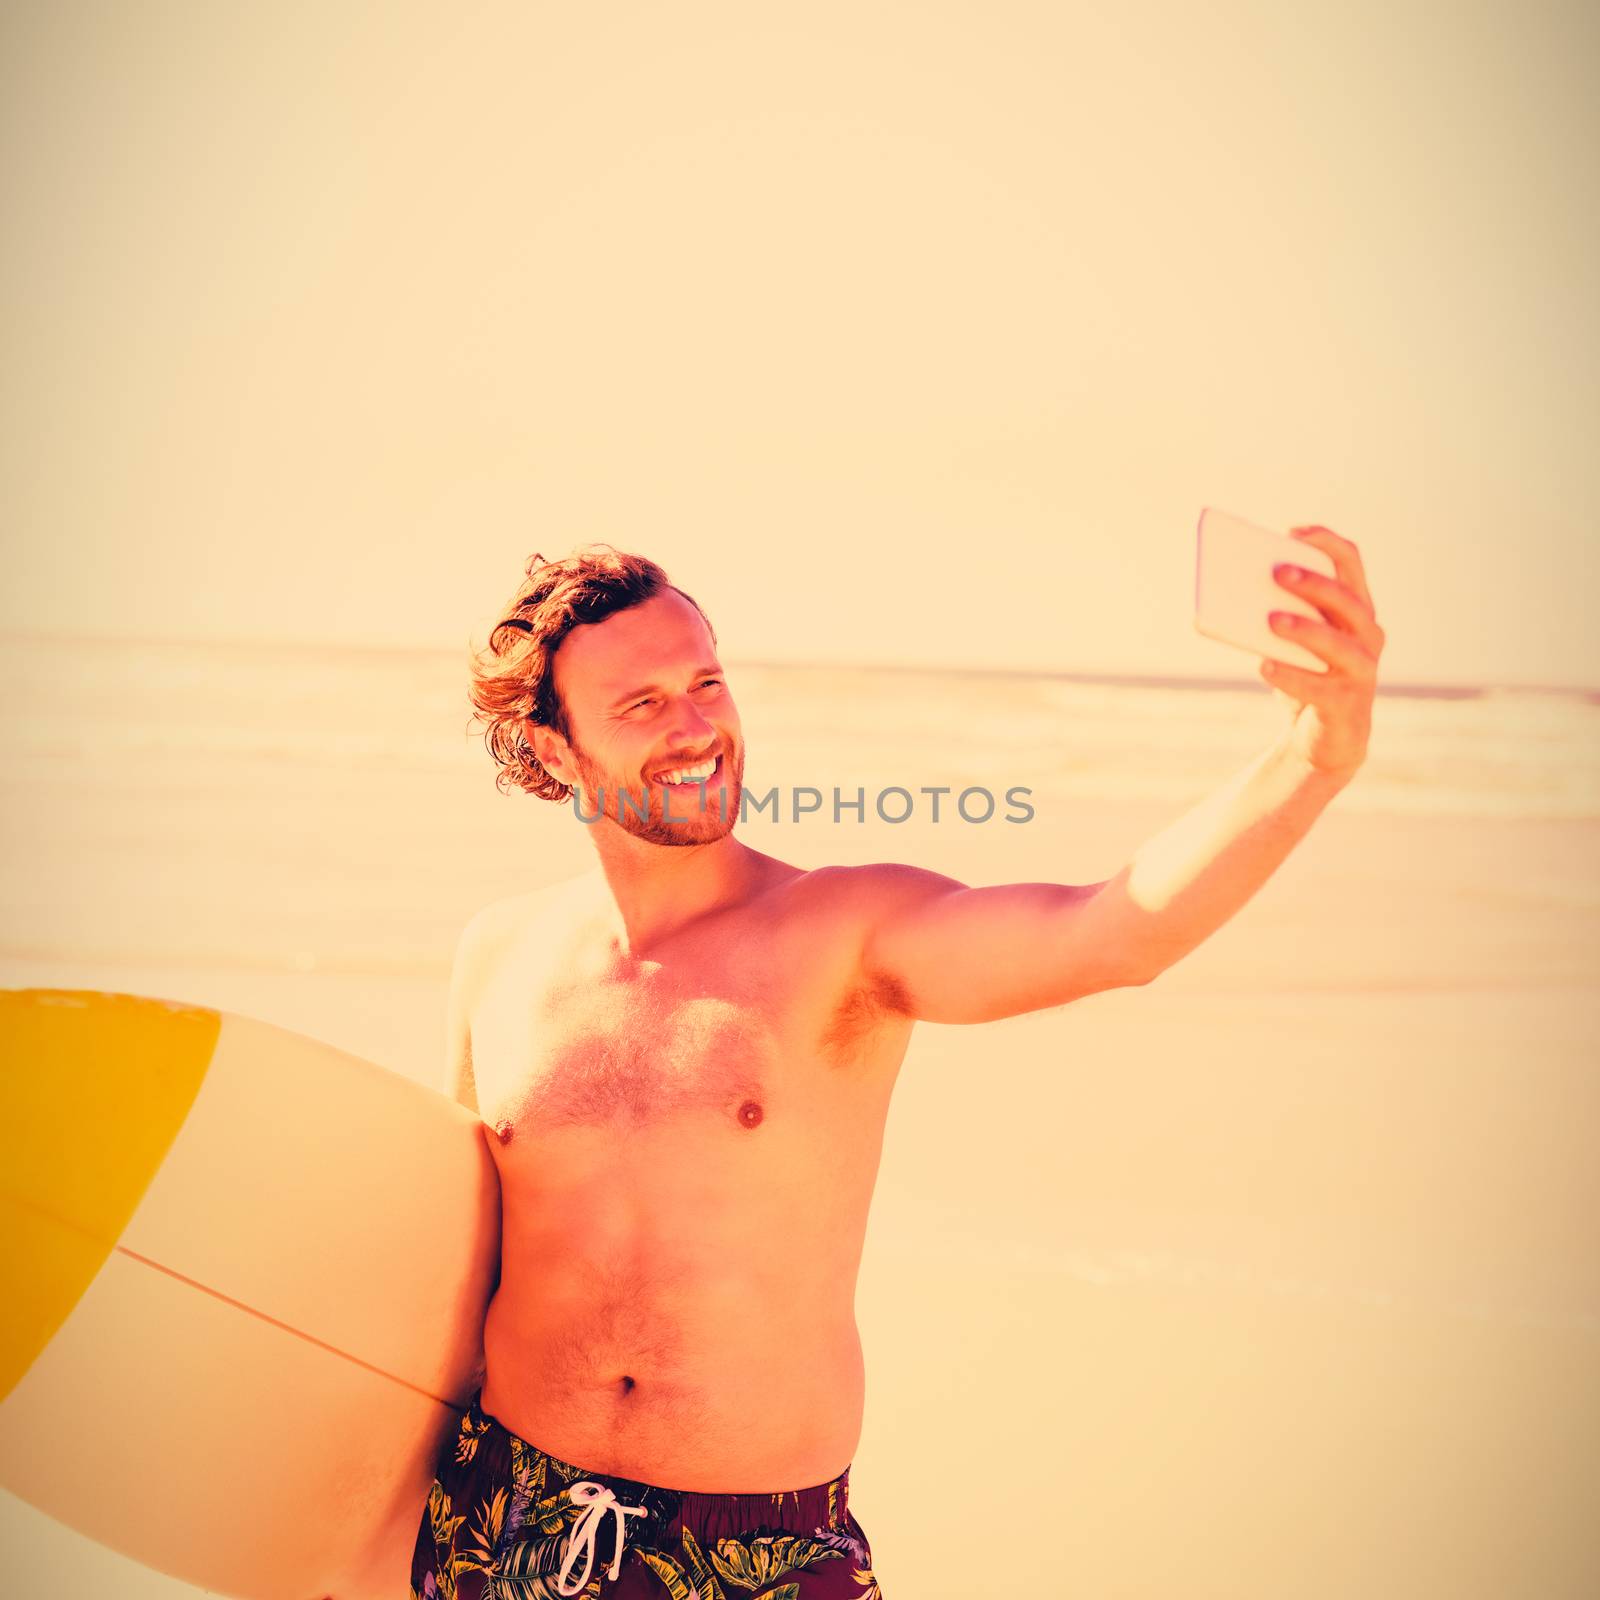 Smiling shirtless man taking selfie with surfboard at beach during sunny day